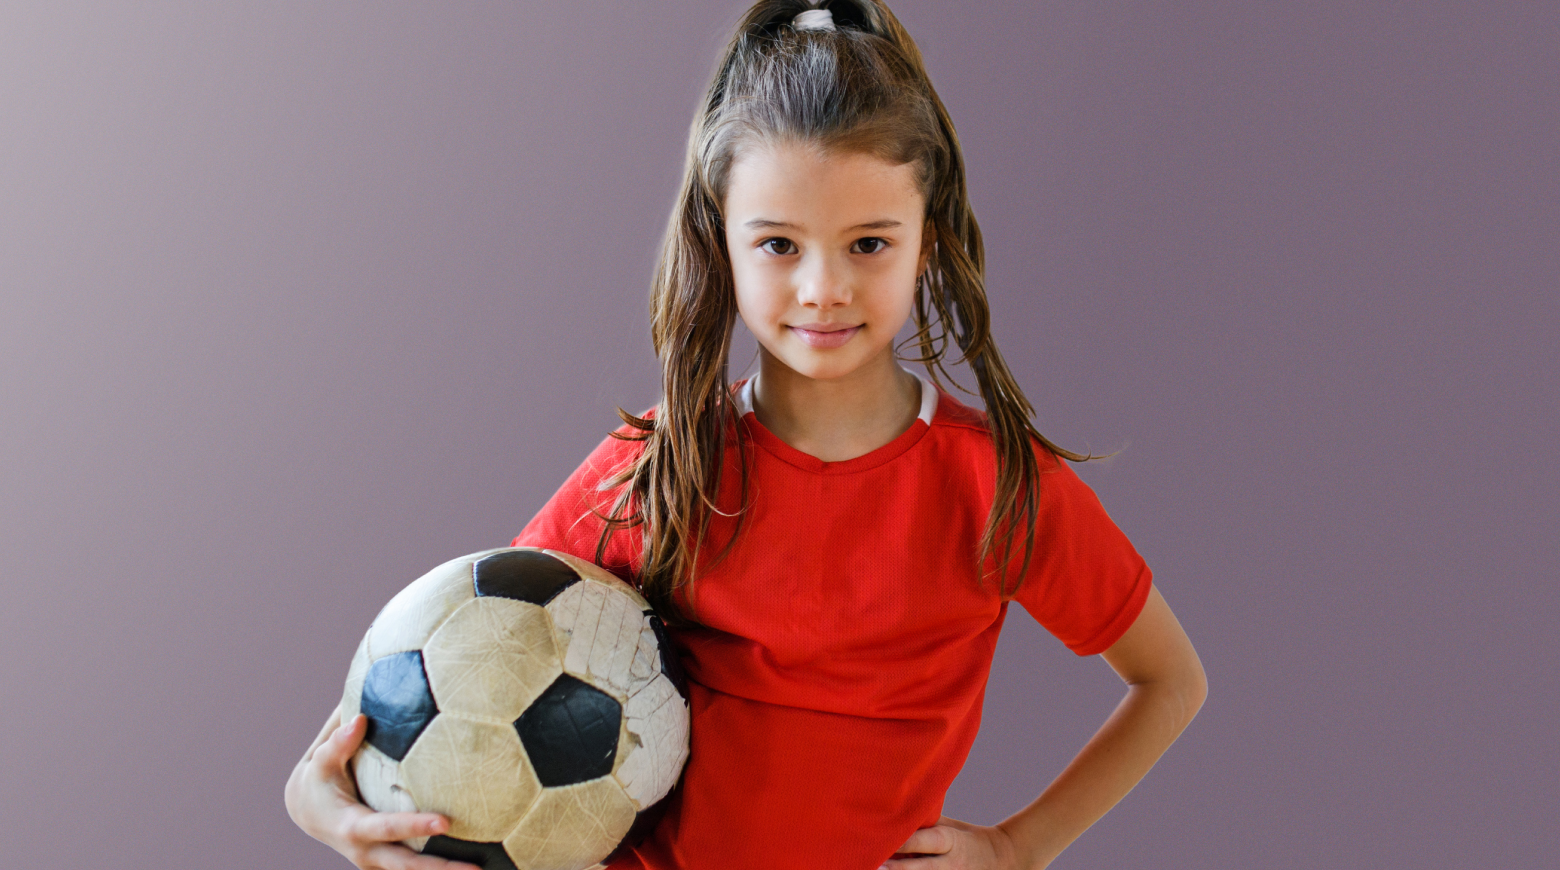 A young girl wearing a red top holding a soccer ball